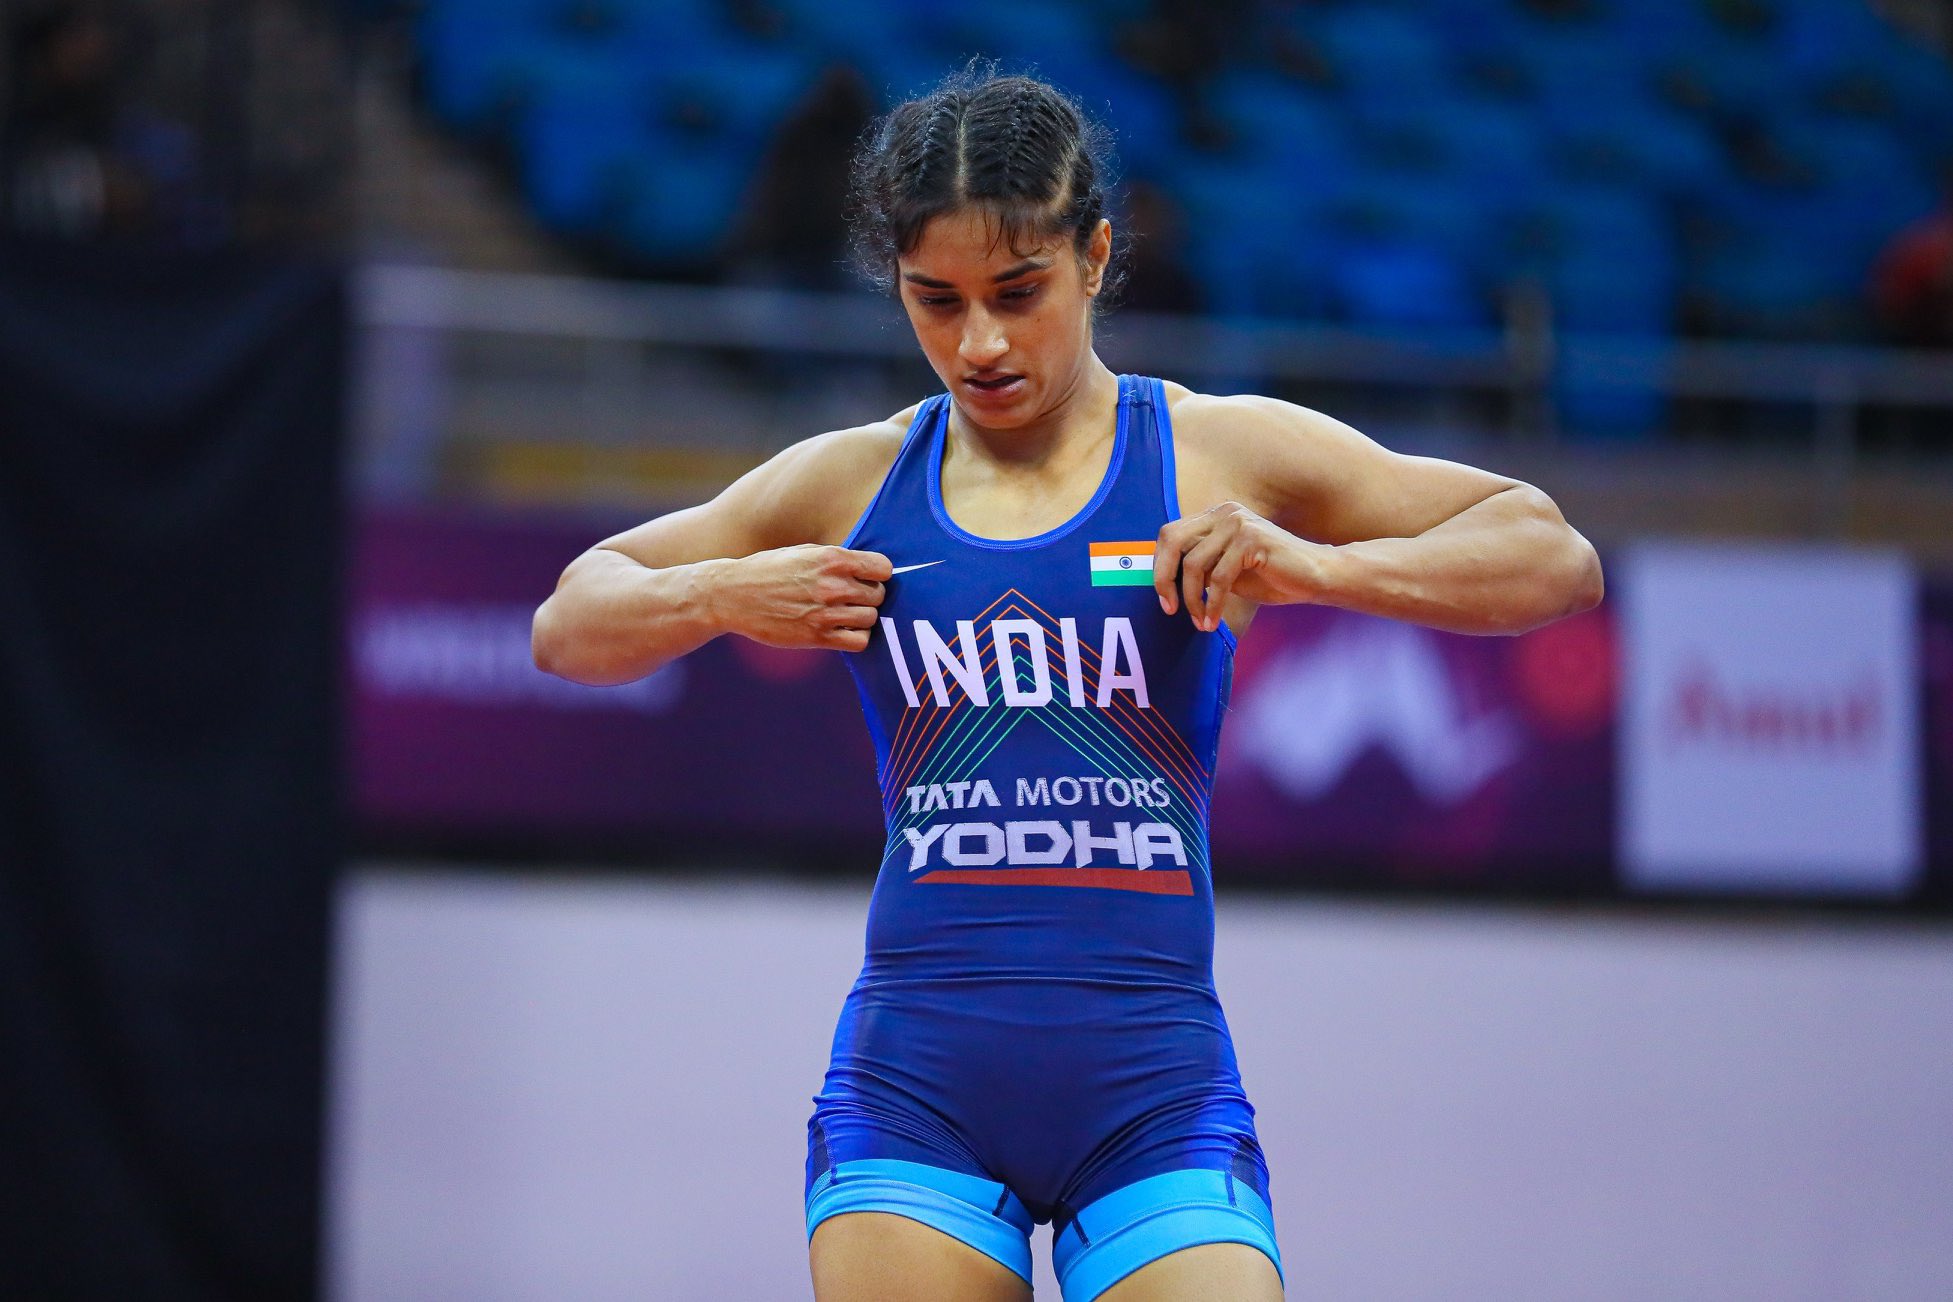 Vinesh Phogat's temporary ban lifted by WFI, set to participate in the World Championships